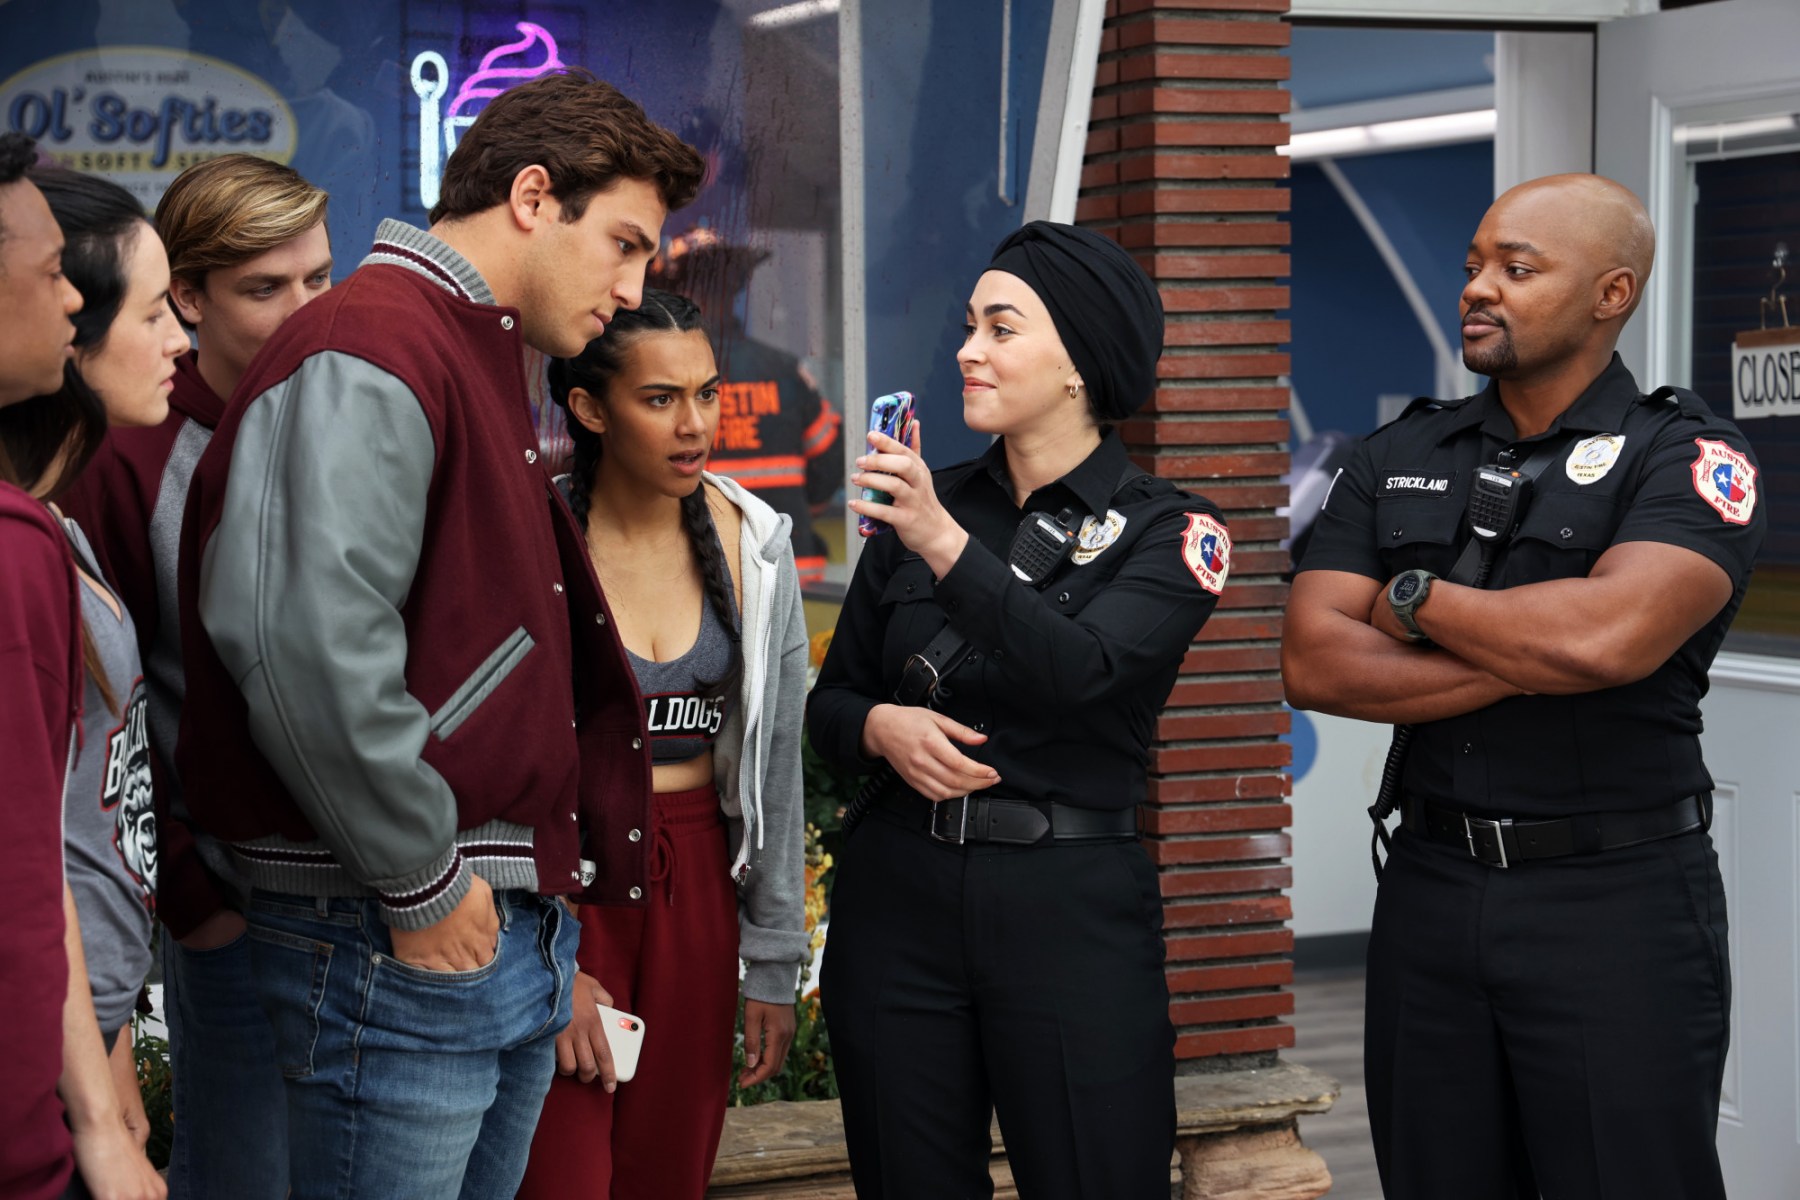 When Is The Next Episode Of 911 Lone Star 911:Lone Star 2x10 "A Little Help From My Friends" Photos - TVPulse